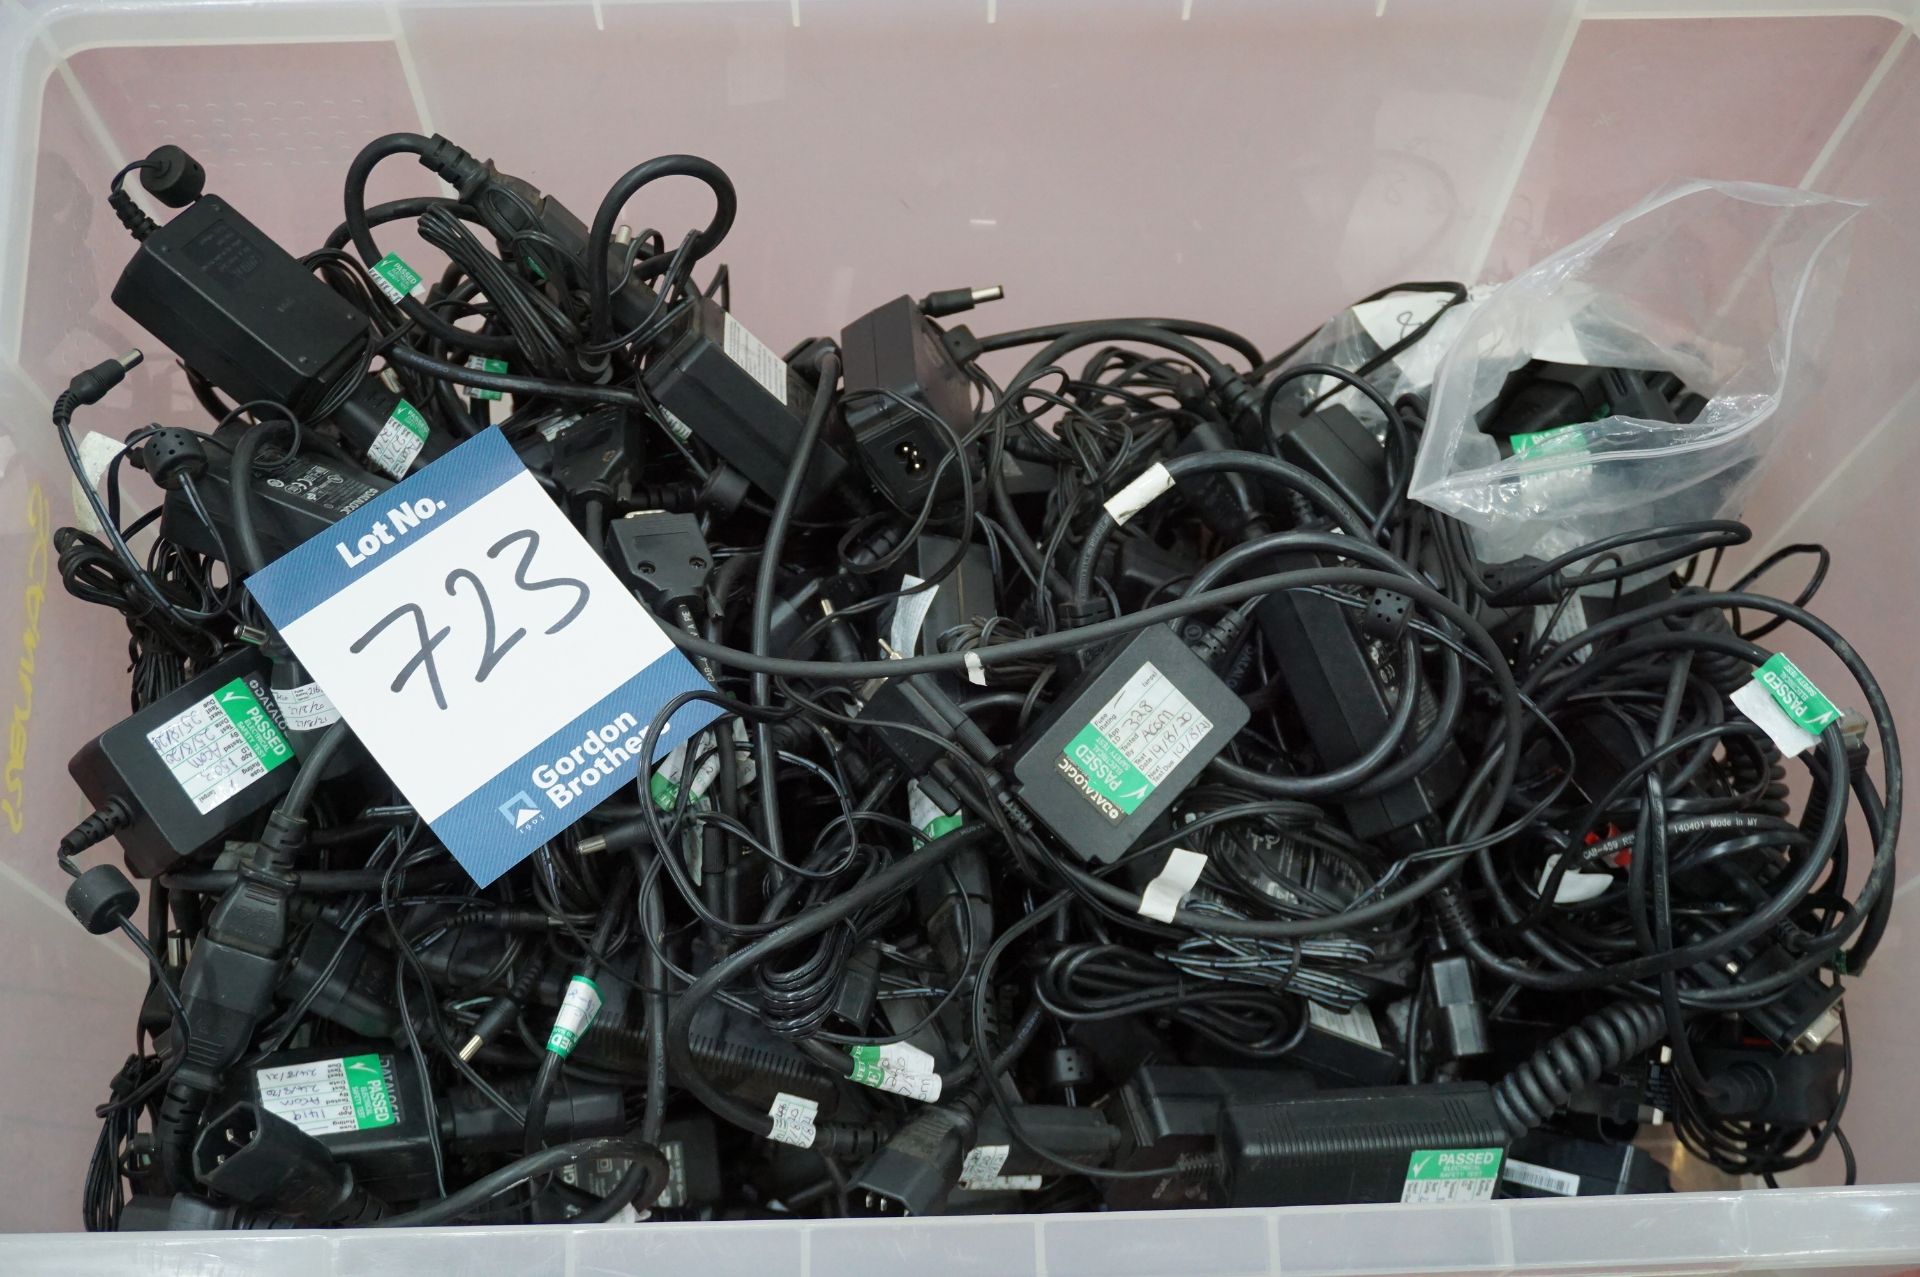 Quantity of replacement cables and powerpacks for Datalogic handheld units